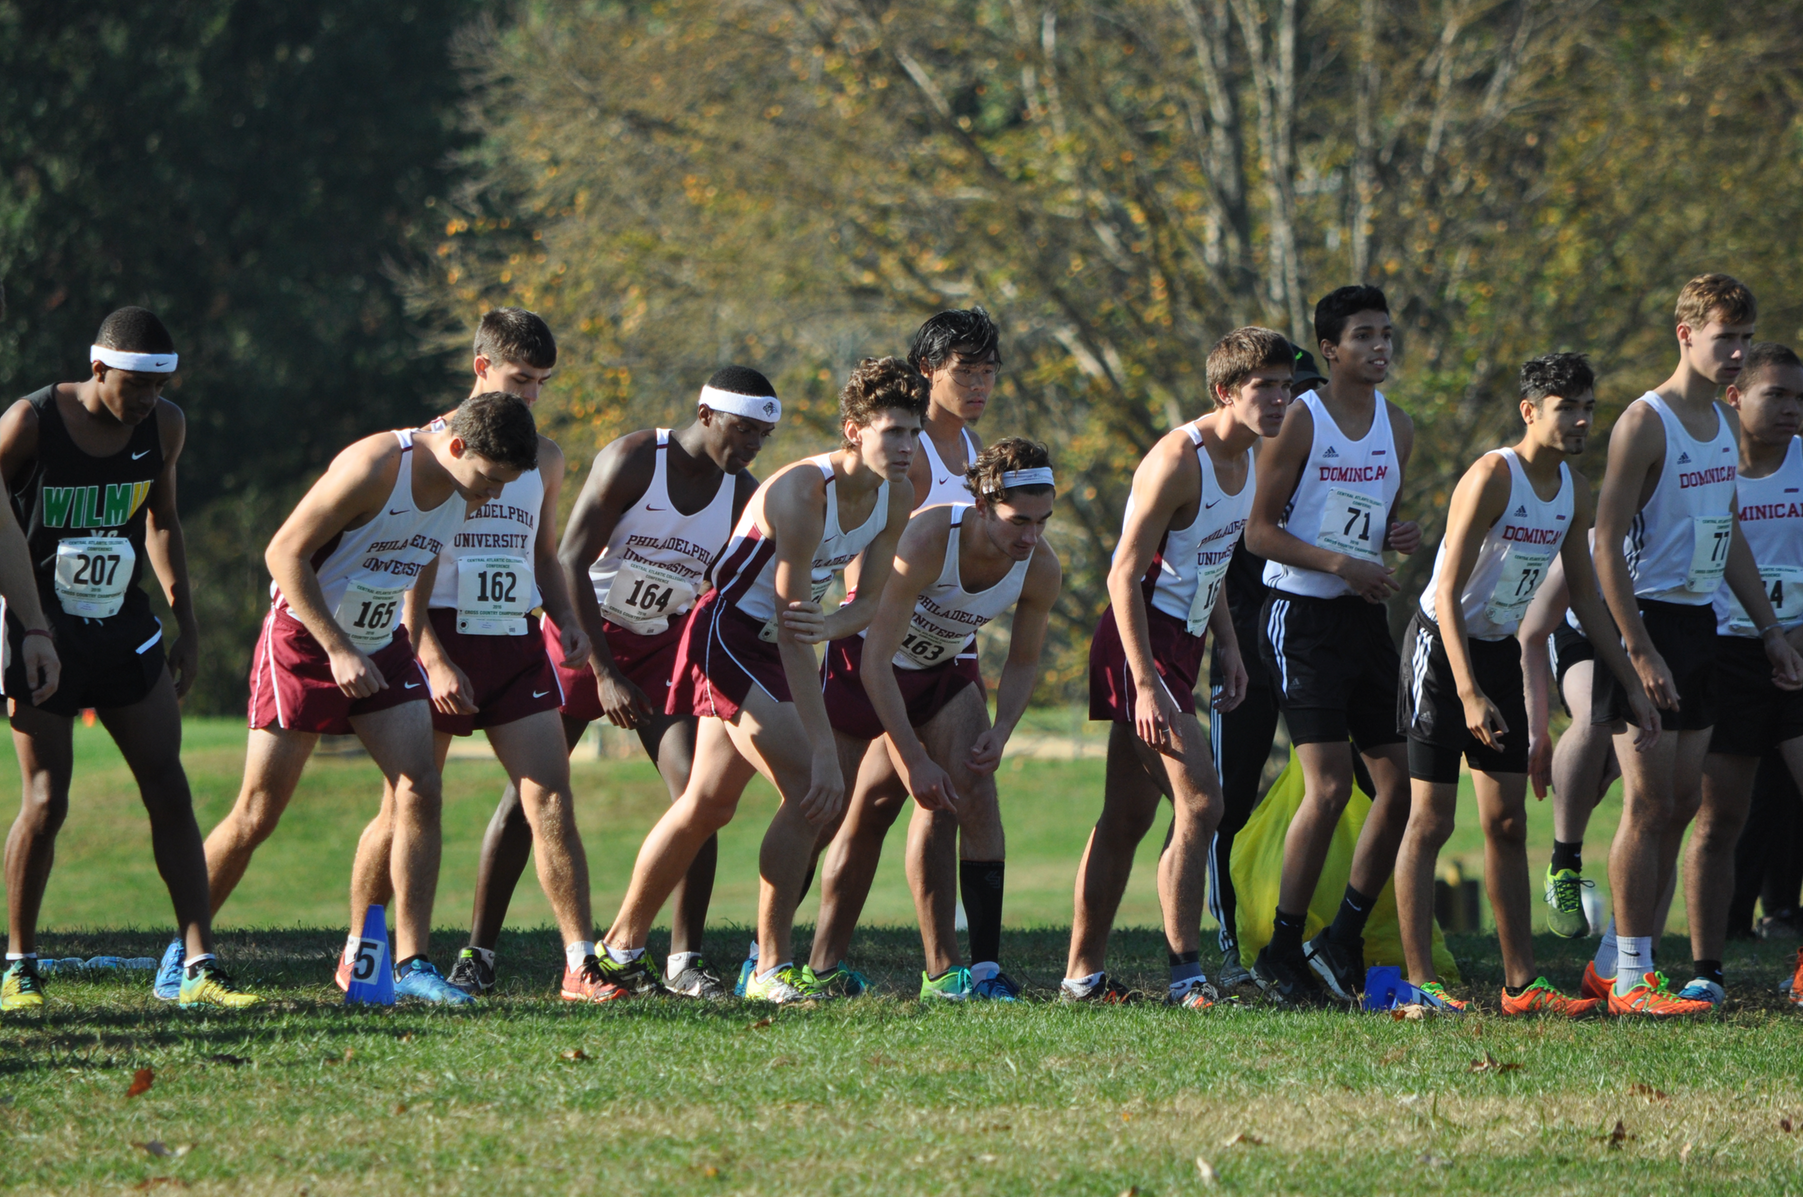 CHARGERS WIN SUNY PURCHASE INVITATIONAL